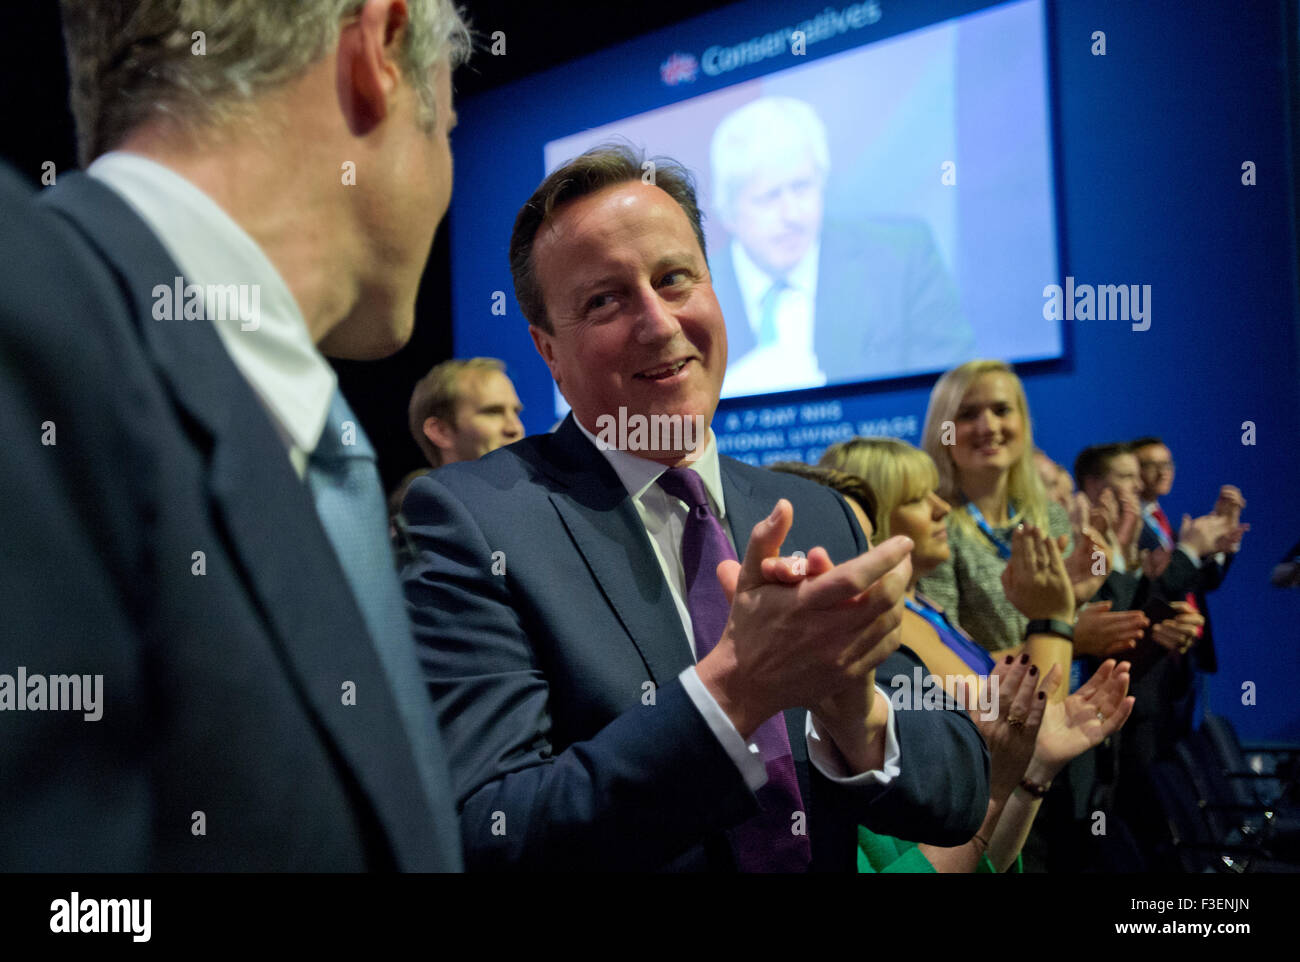 Manchester, UK. 6th October 2015. Zac Goldsmith MP, Conservative Party Candidate for London Mayor (left), and The Rt Hon David Cameron MP, Prime Minister, applaud Boris Johnson, Mayor of London, following his speech during Day 3 of the 2015 Conservative Party Conference in Manchester. Credit:  Russell Hart/Alamy Live News. Stock Photo